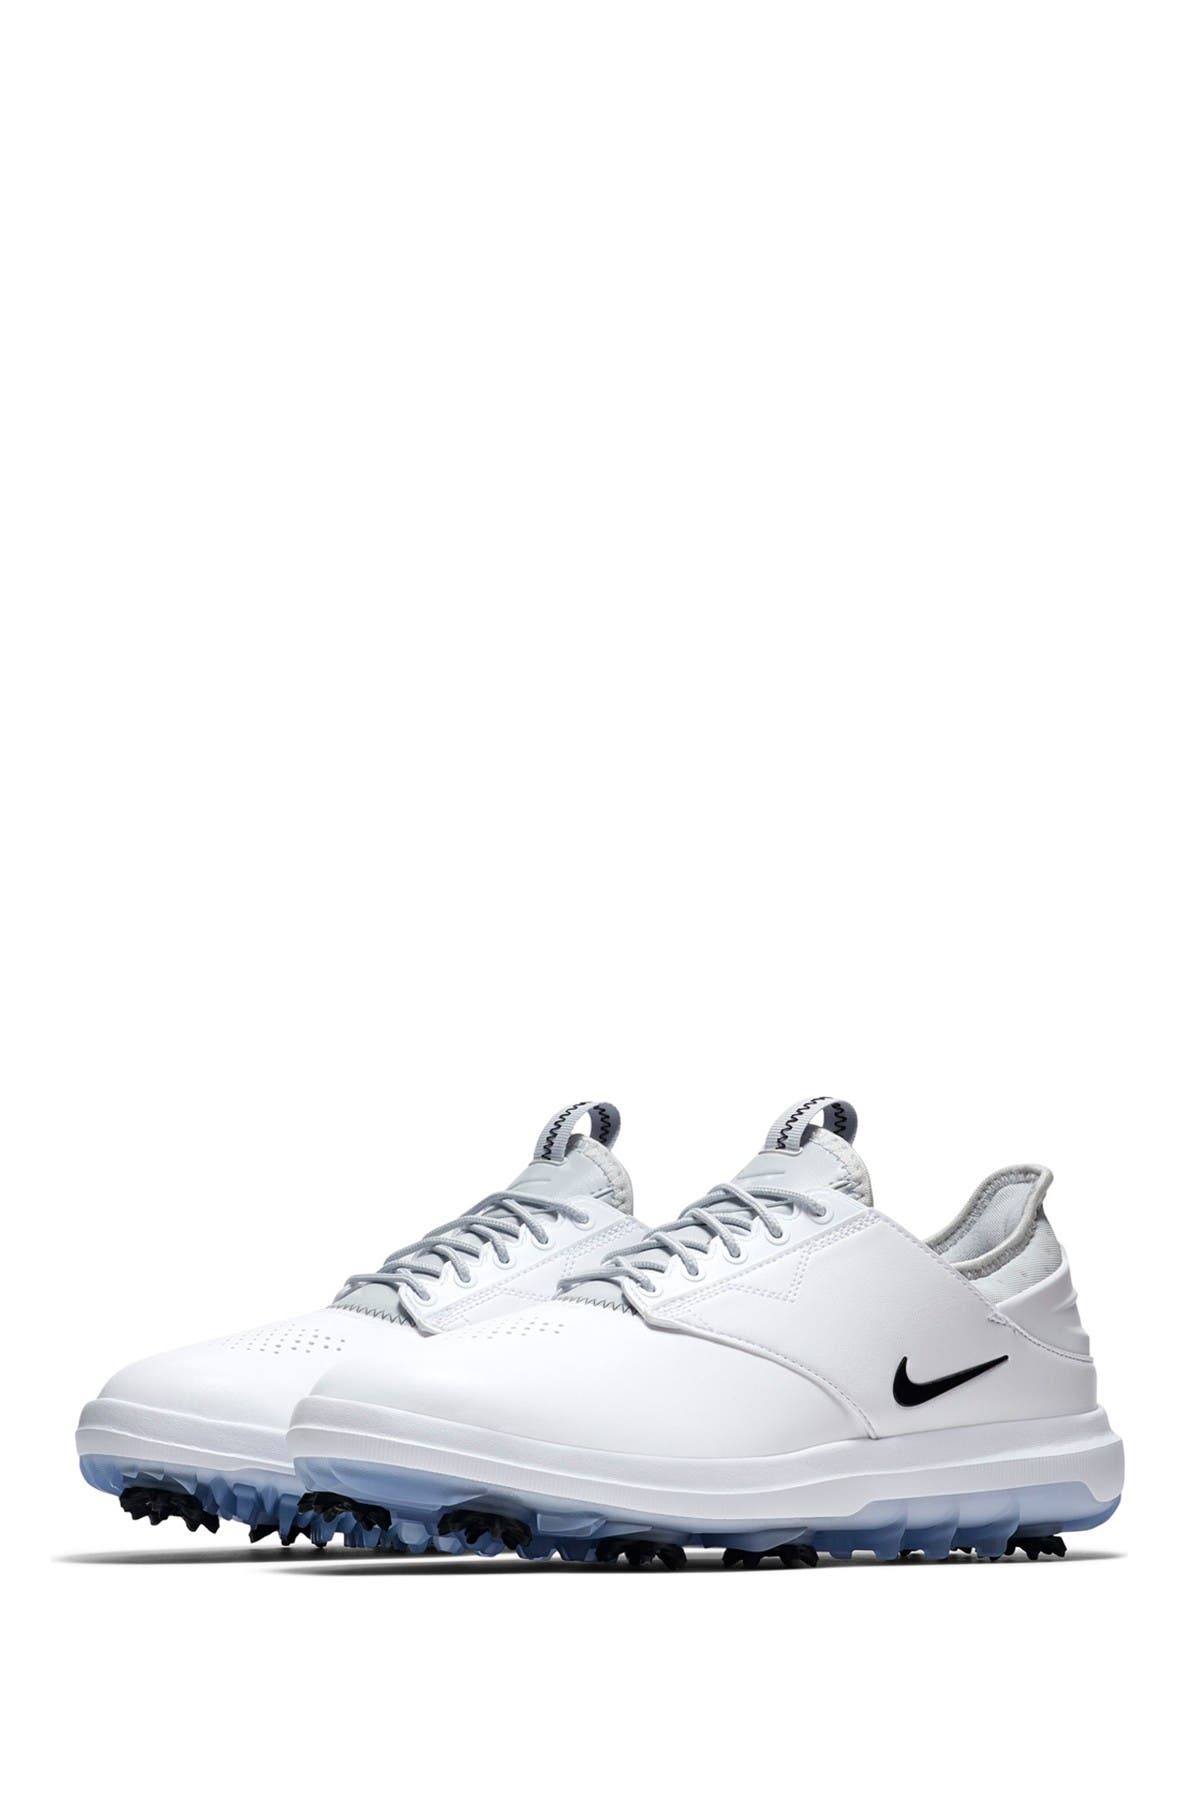 nike zoom direct golf shoes